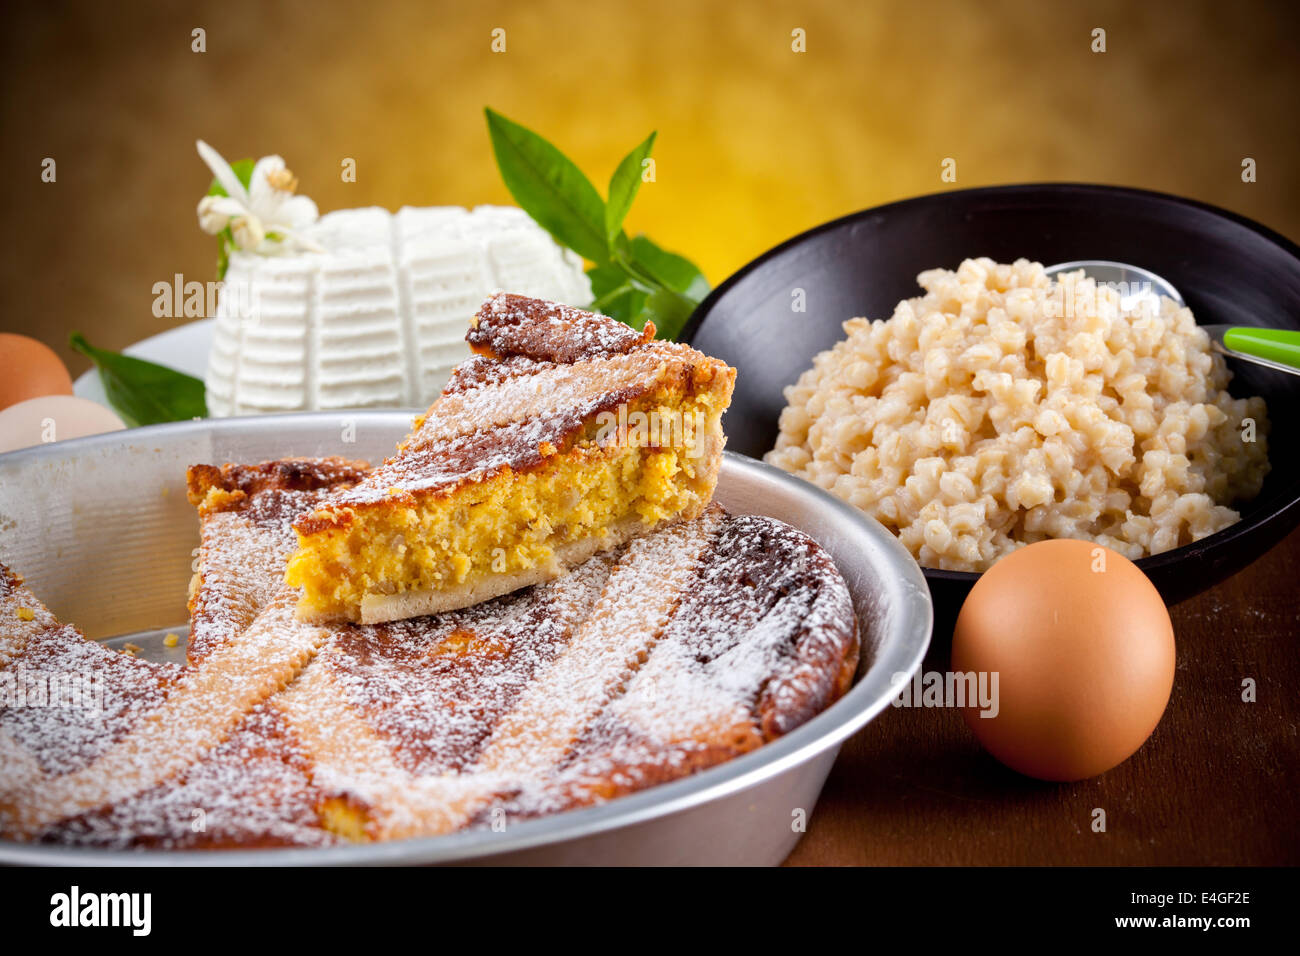 Neapolitan Pastiera with ingredients on wooden table Stock Photo